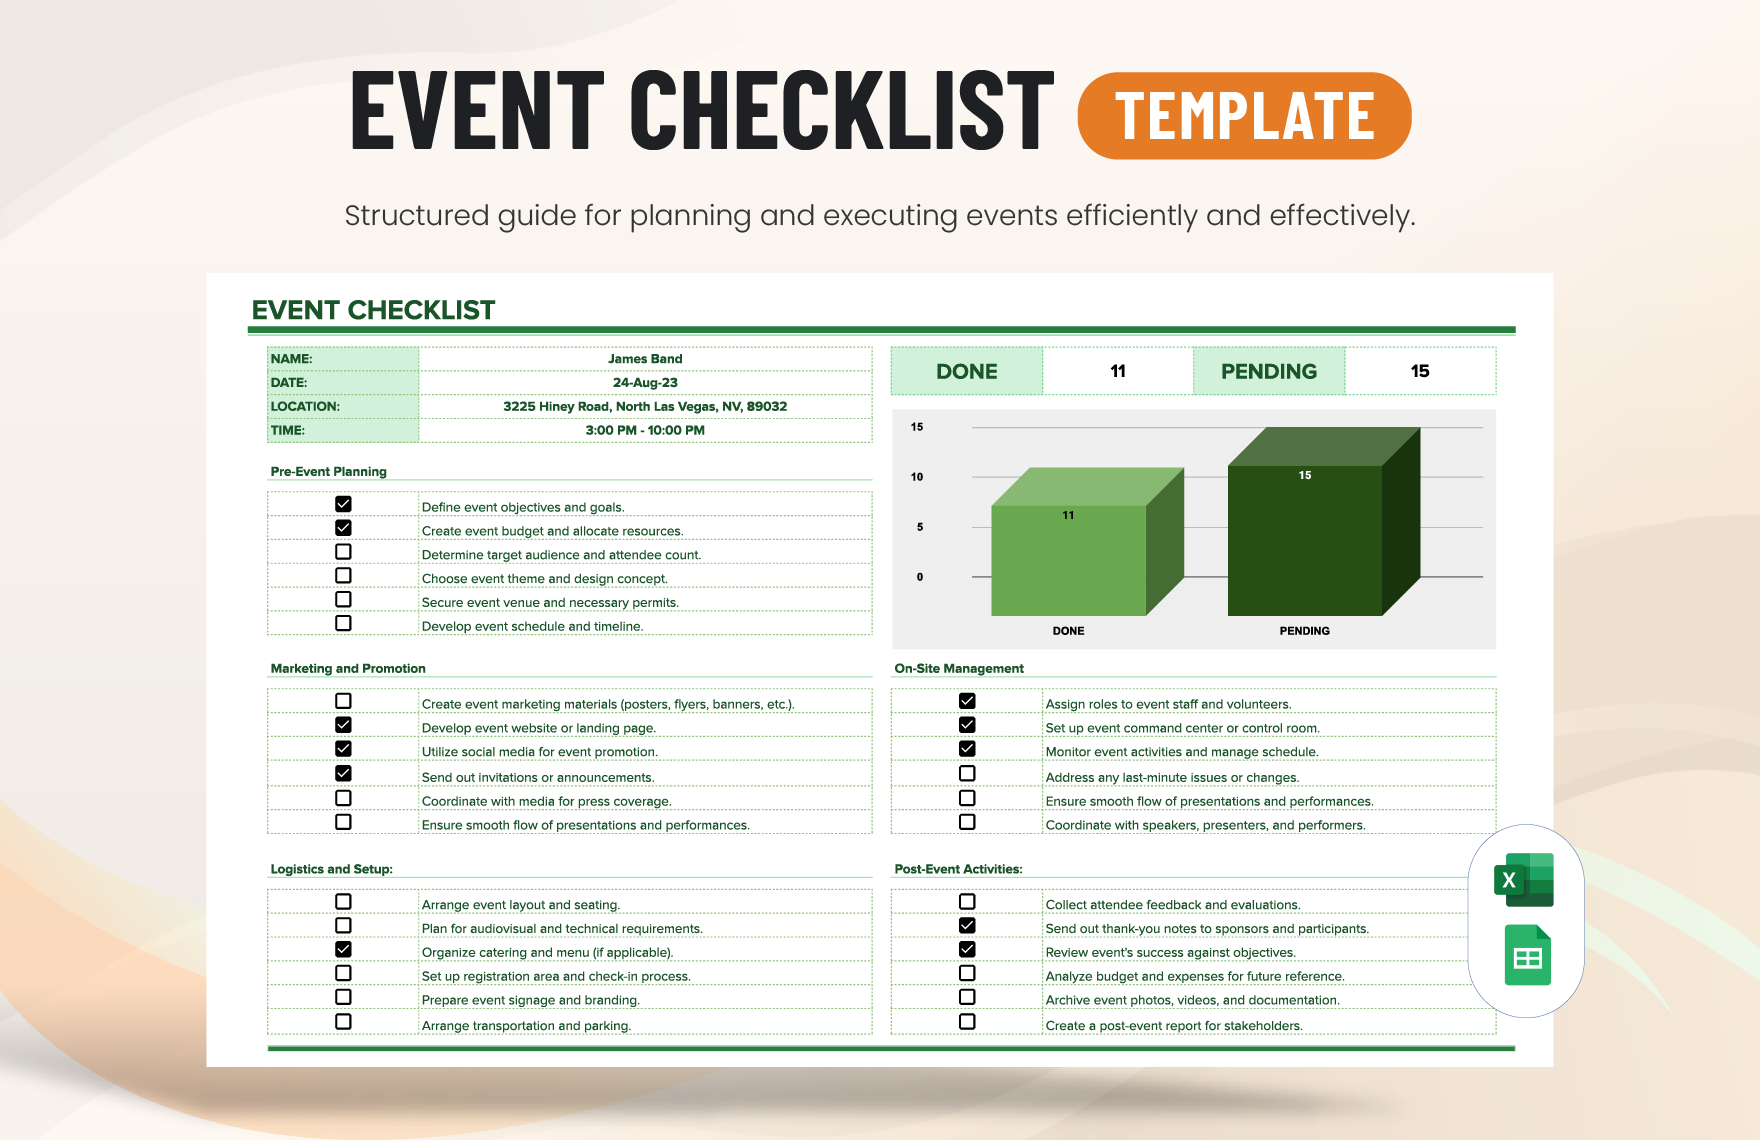 Event Checklist Template in Excel, Google Sheets